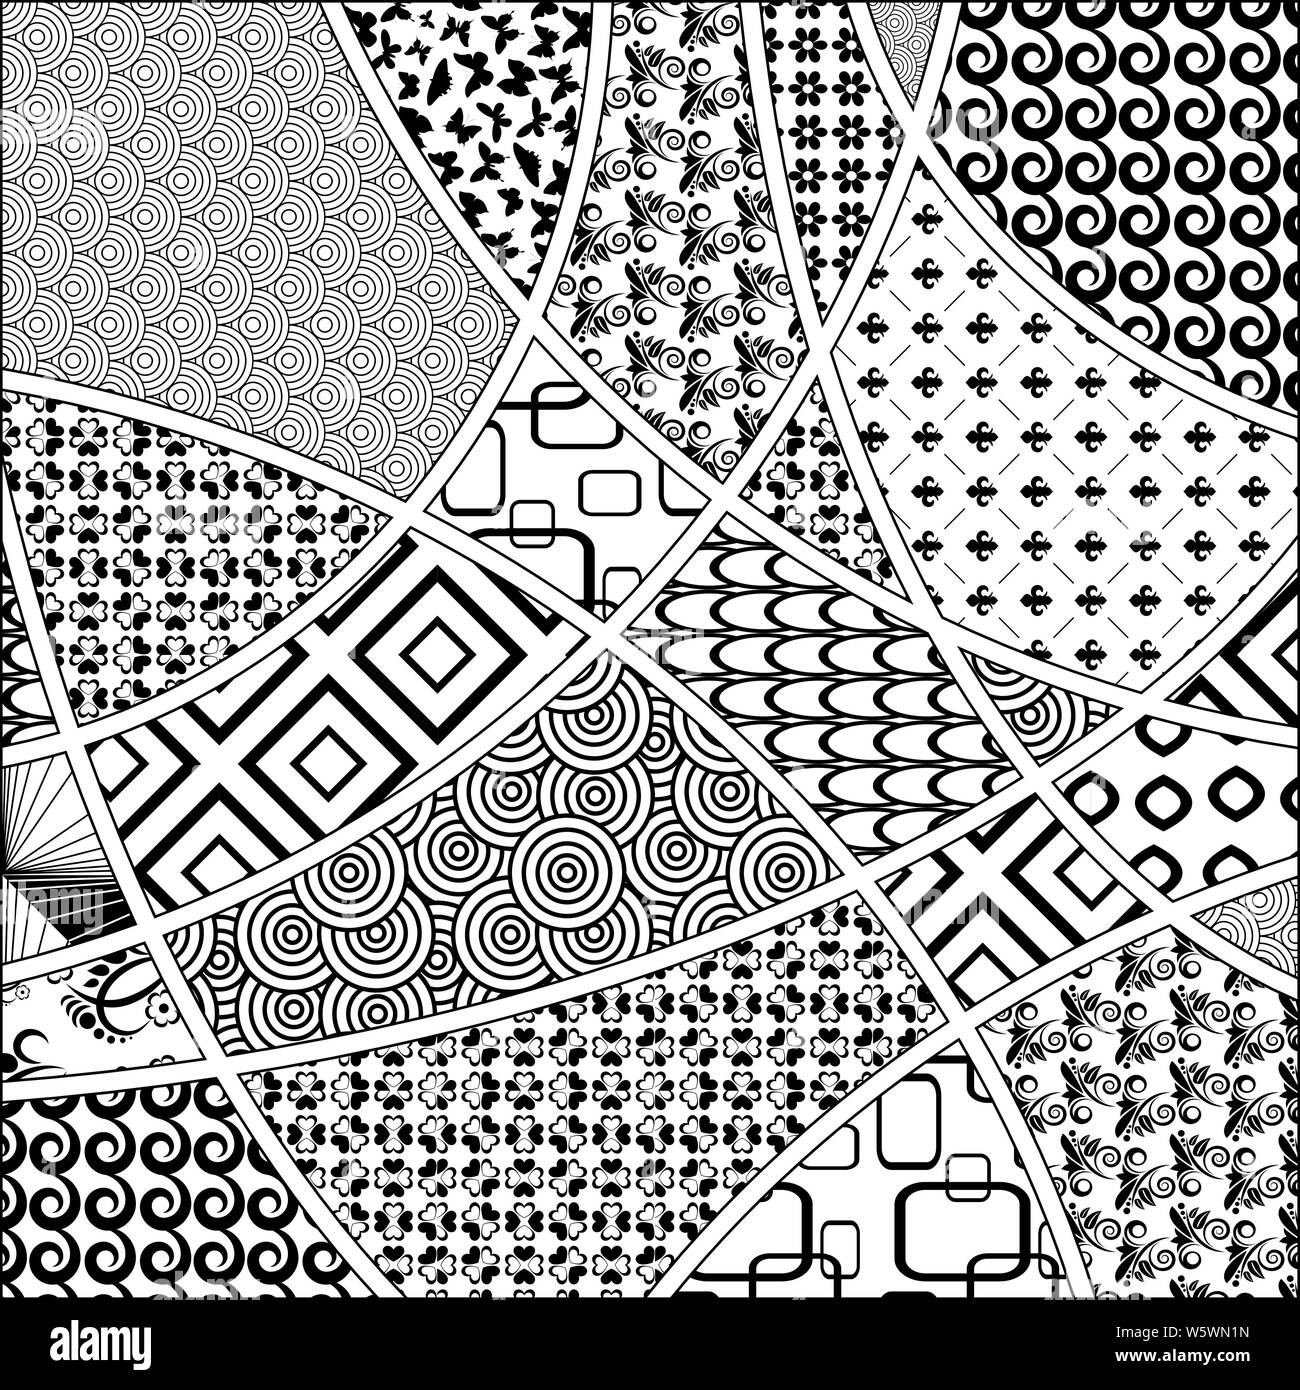 Set of different black and white zentangle patterns Stock Vector Image ...